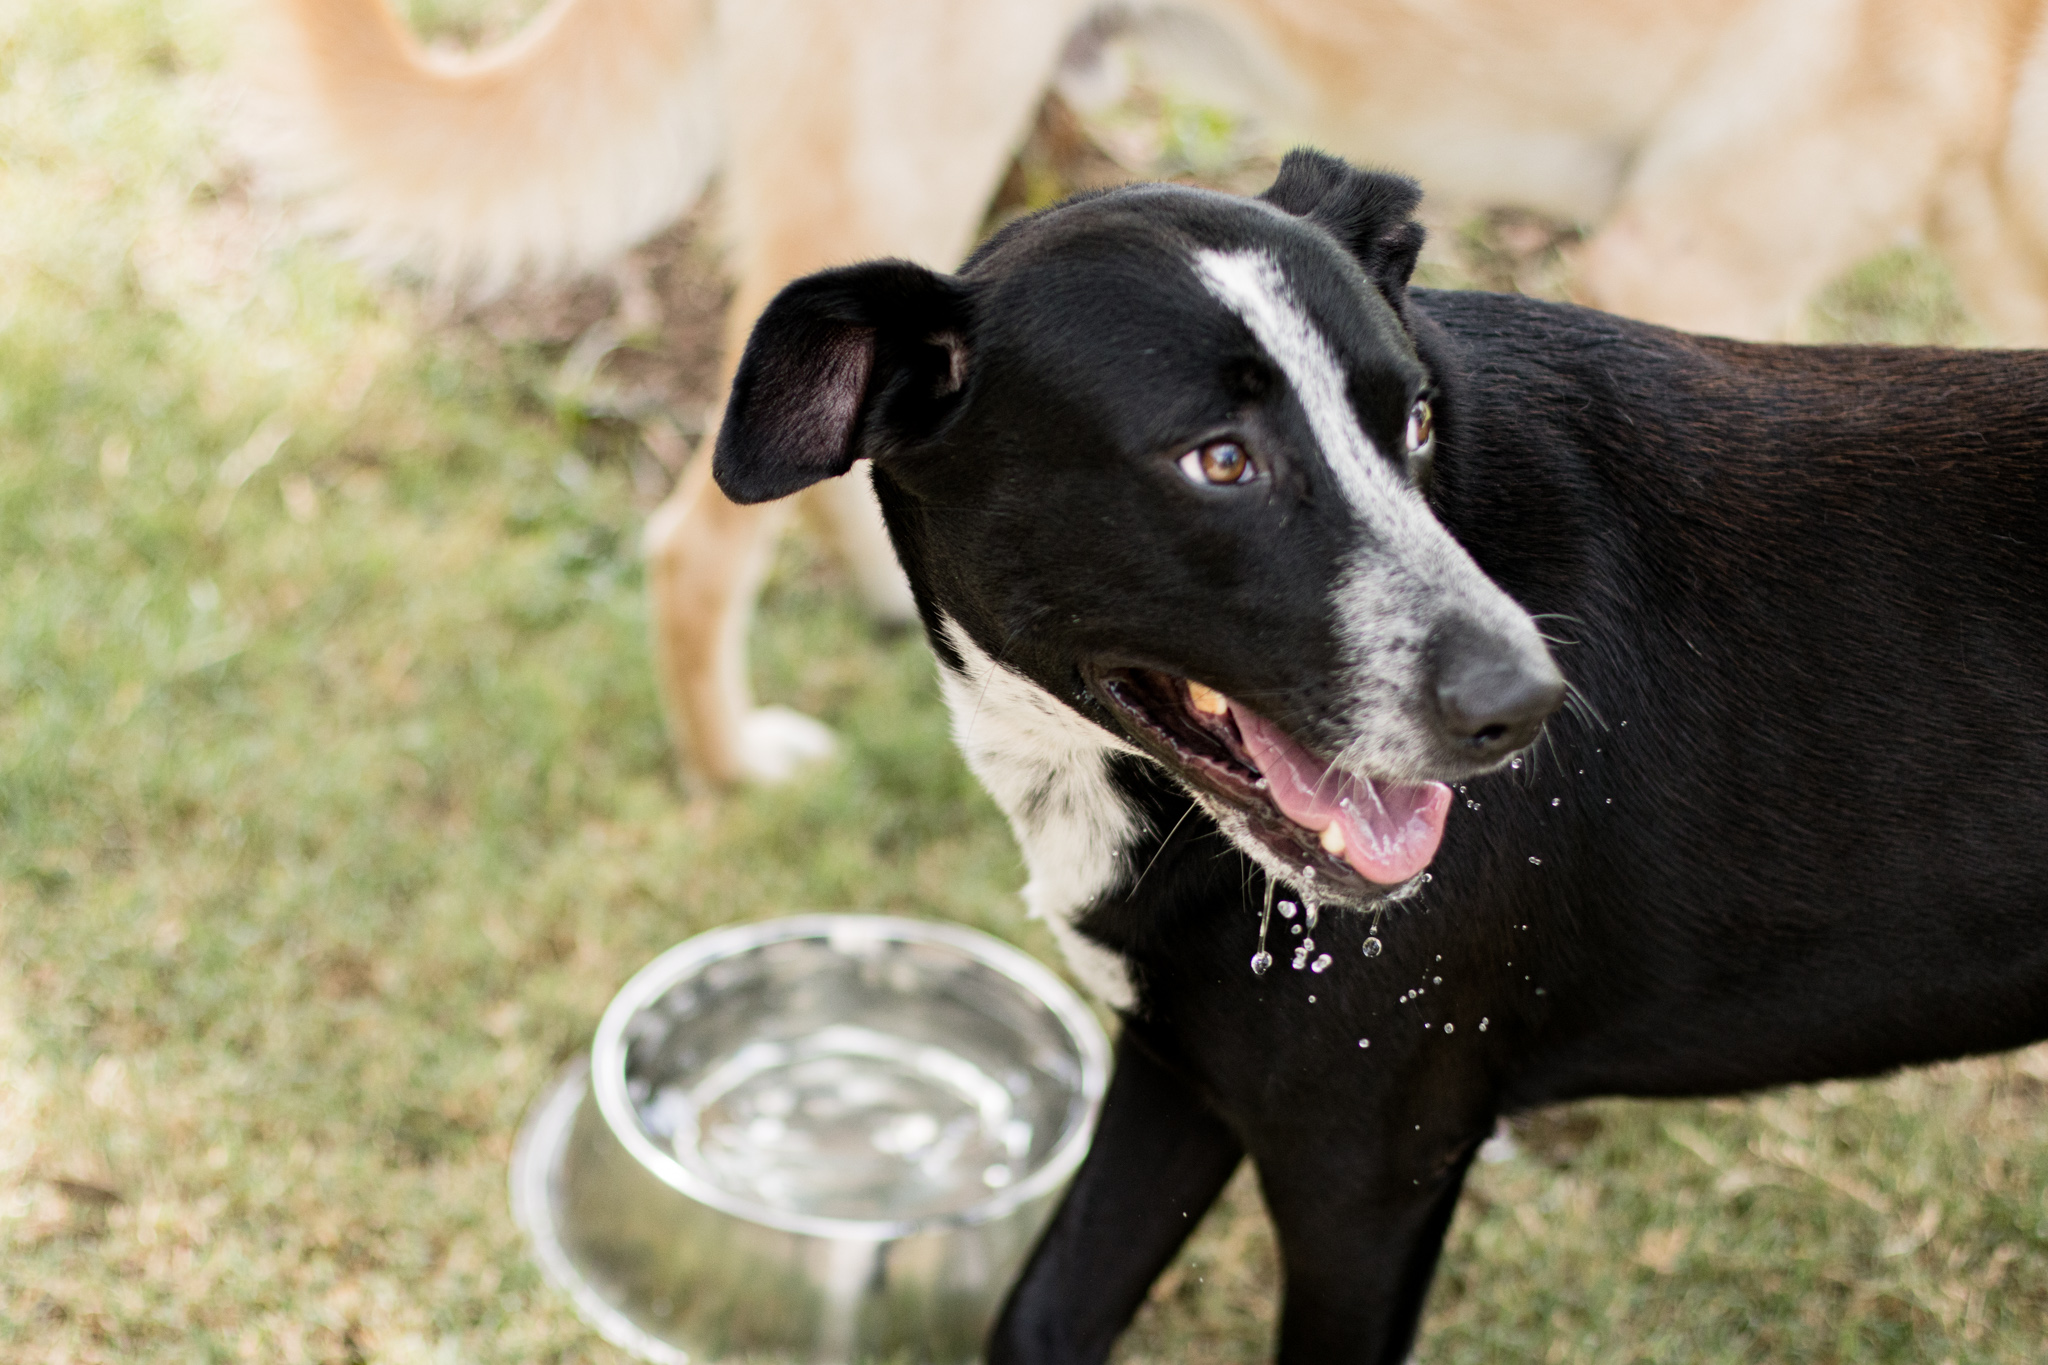 Beat the Heat: Pet safety in high temperatures - Houston SPCA